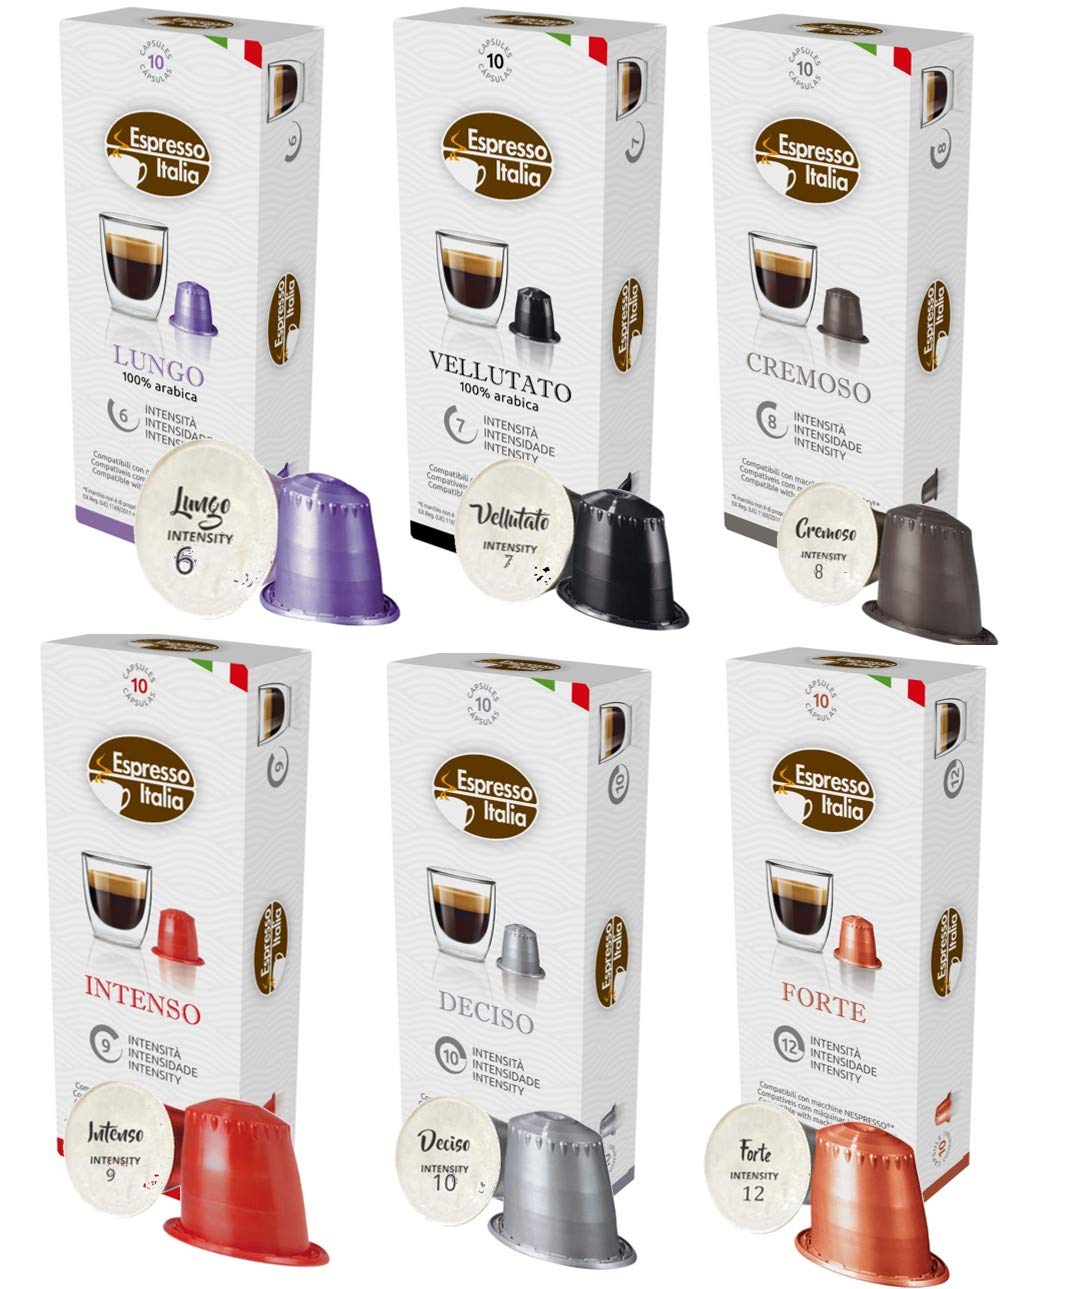 Really nice product at a great price. Smooth and full bodied, delicious cappuccinos that fit great in my Lor cappuccino maker